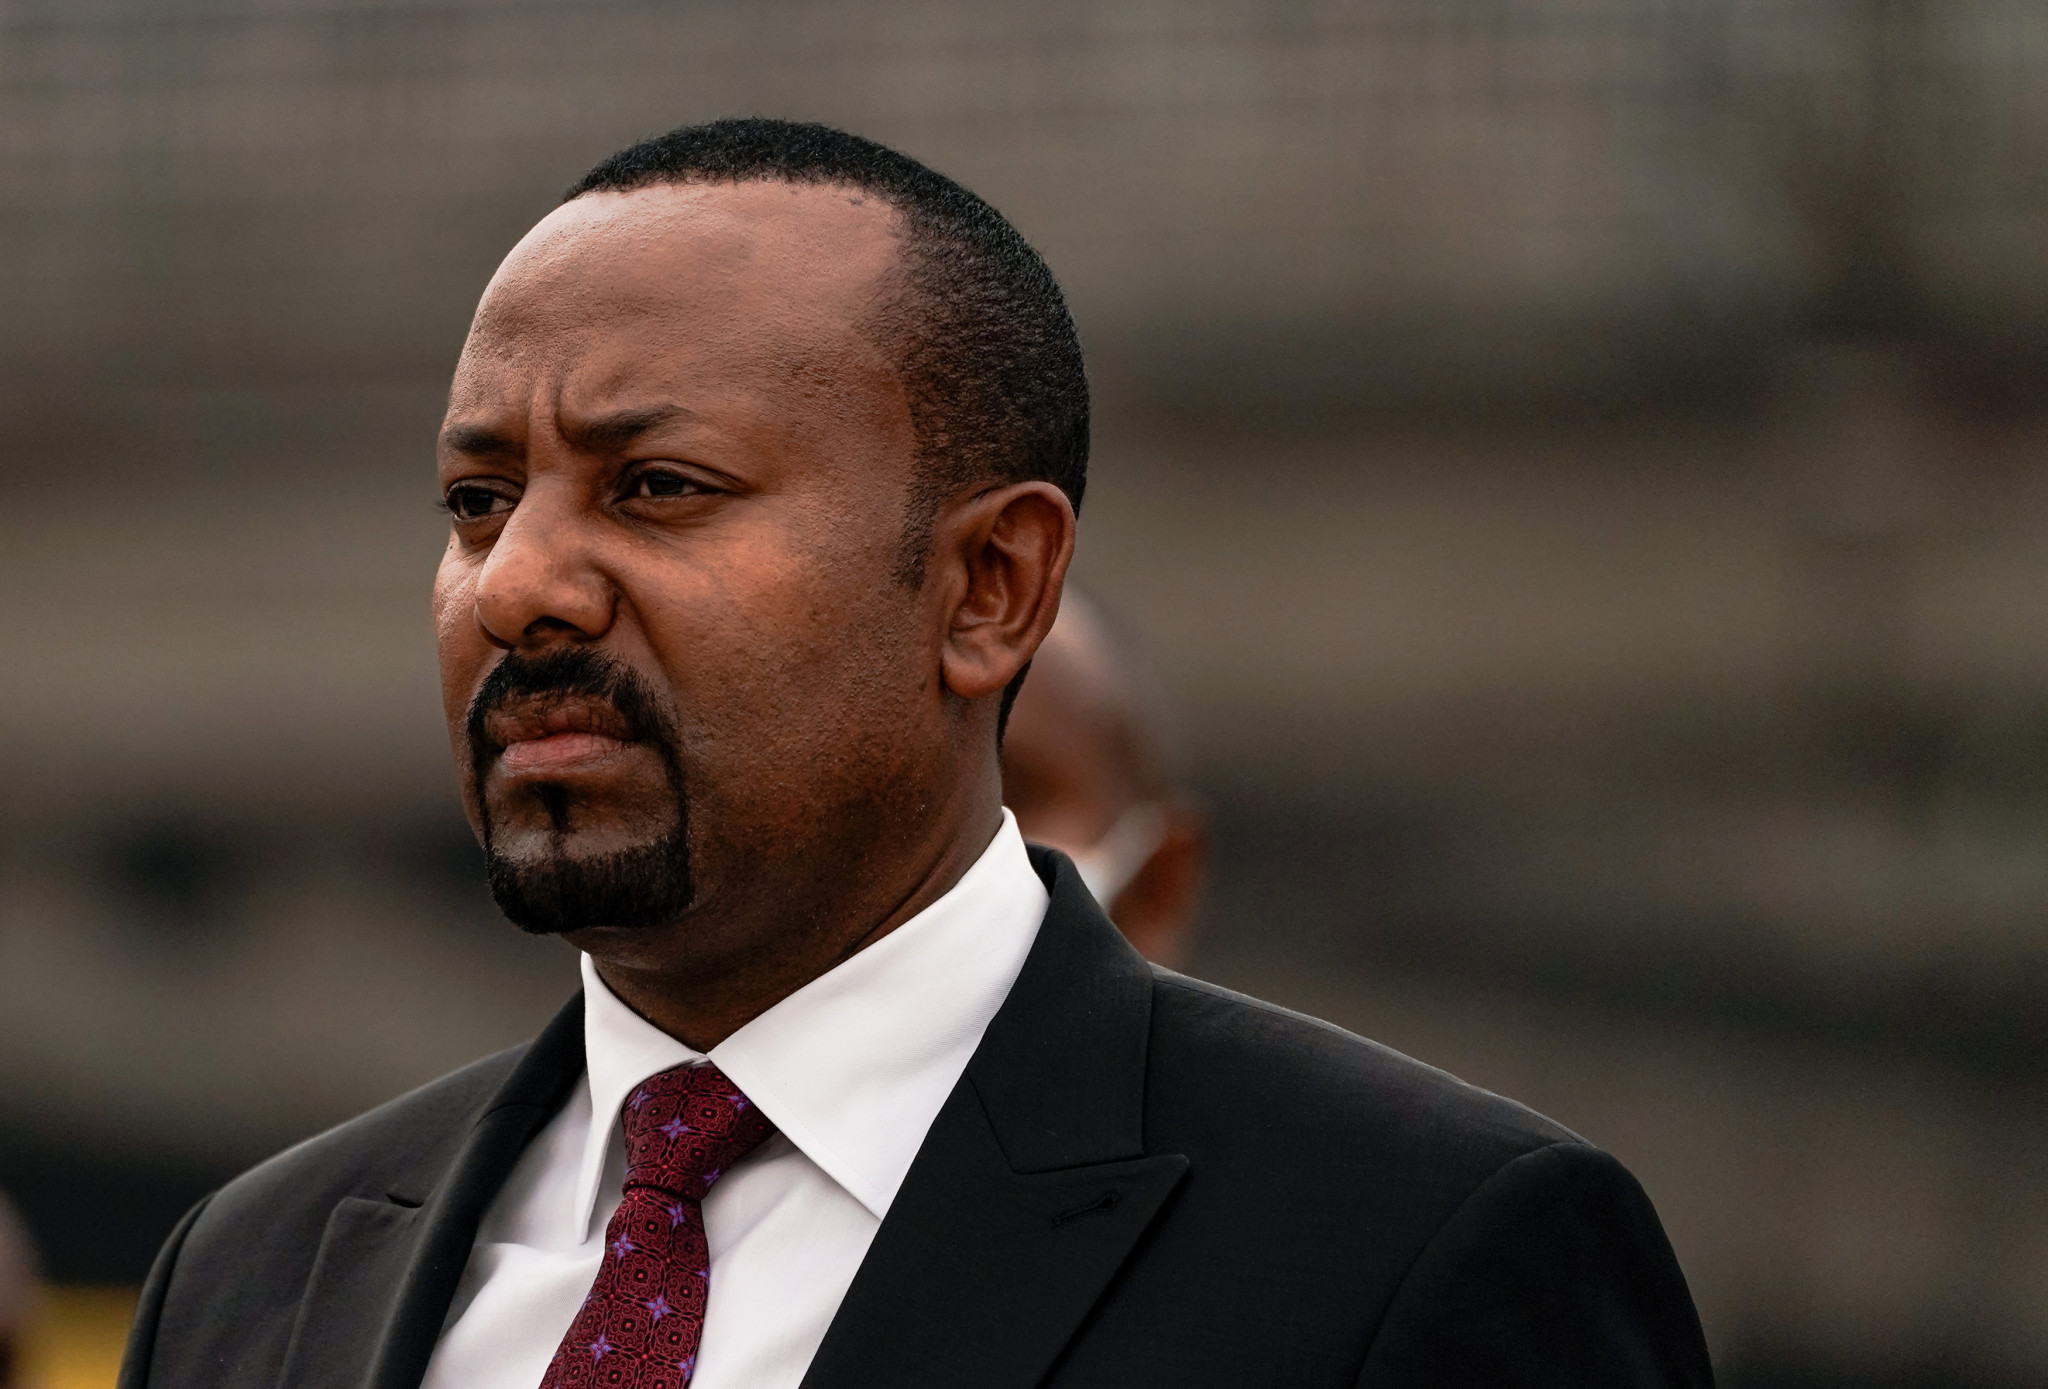 Ethiopia's Prime Minister Abiy Ahmed has also said he will serve on the front line as the conflict with the TPLF intensifies ©Getty Images